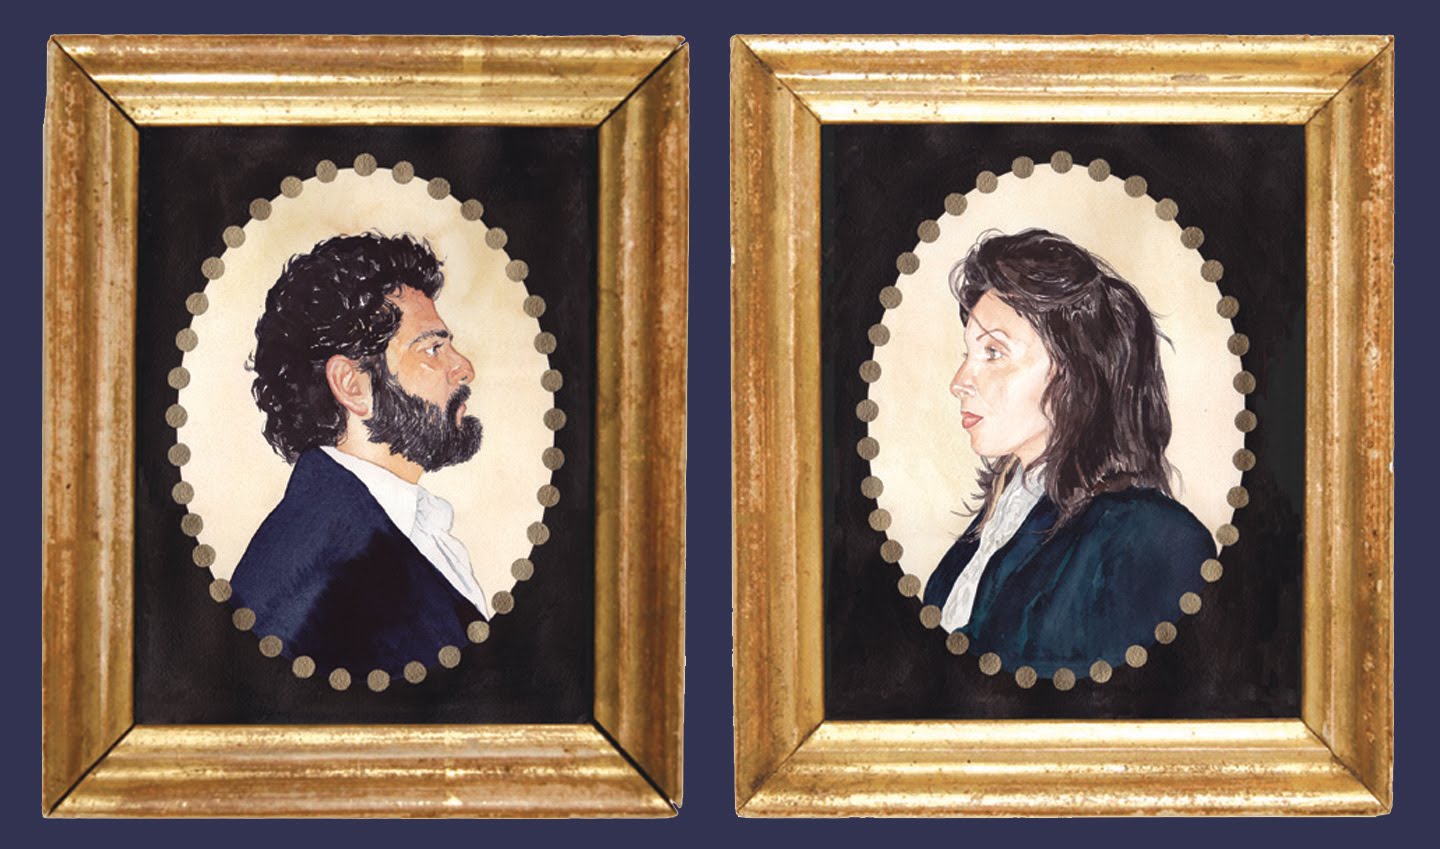  Wedding Portraits painted in Early American Style, watercolor on paper    